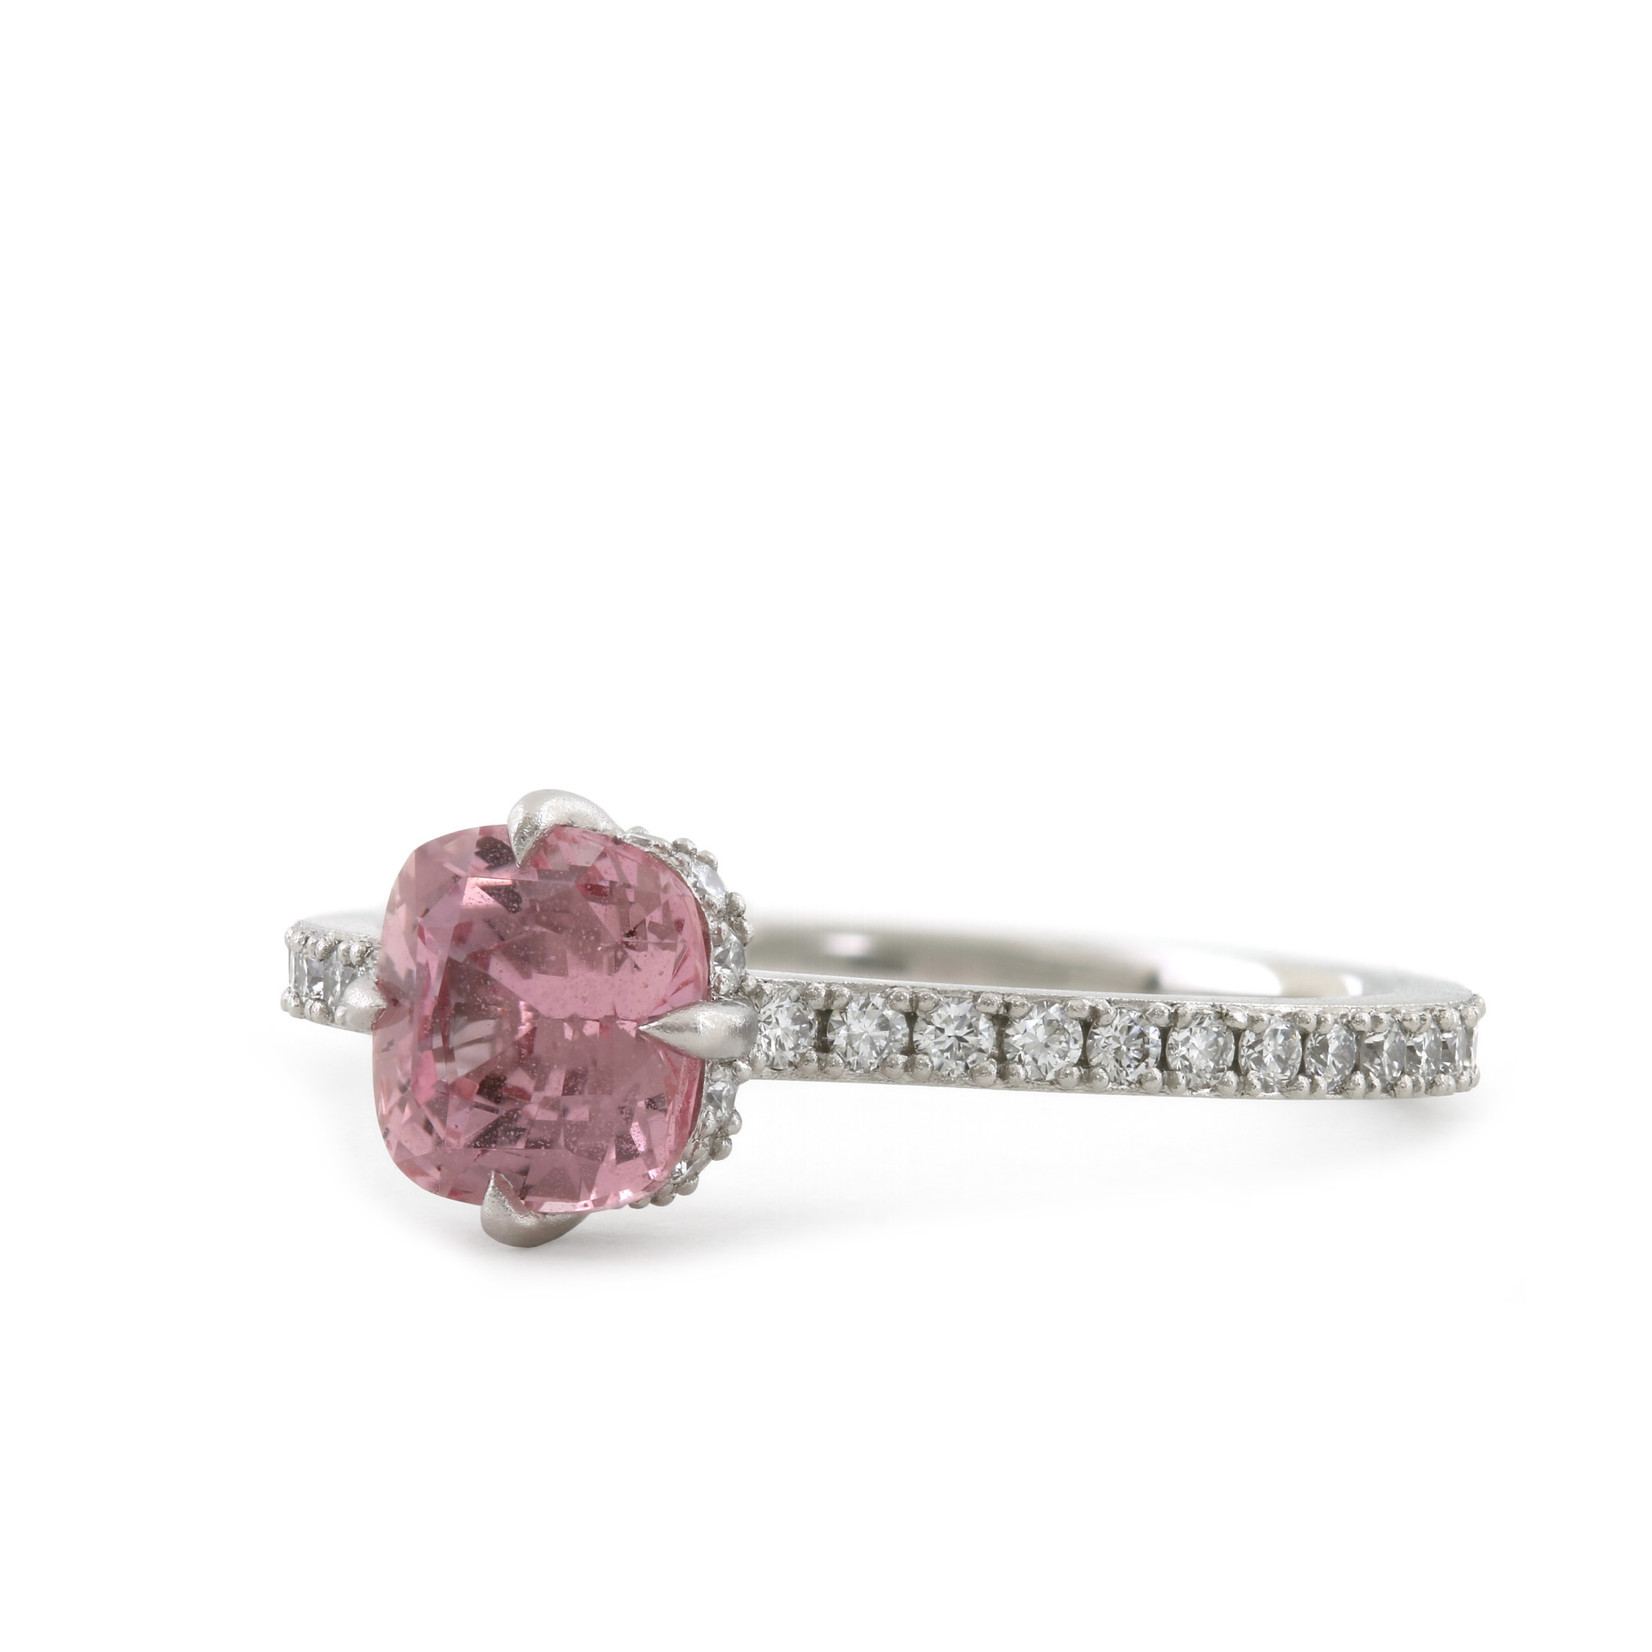 Baxter Moerman Celeste Ring with Padparadscha Sapphire